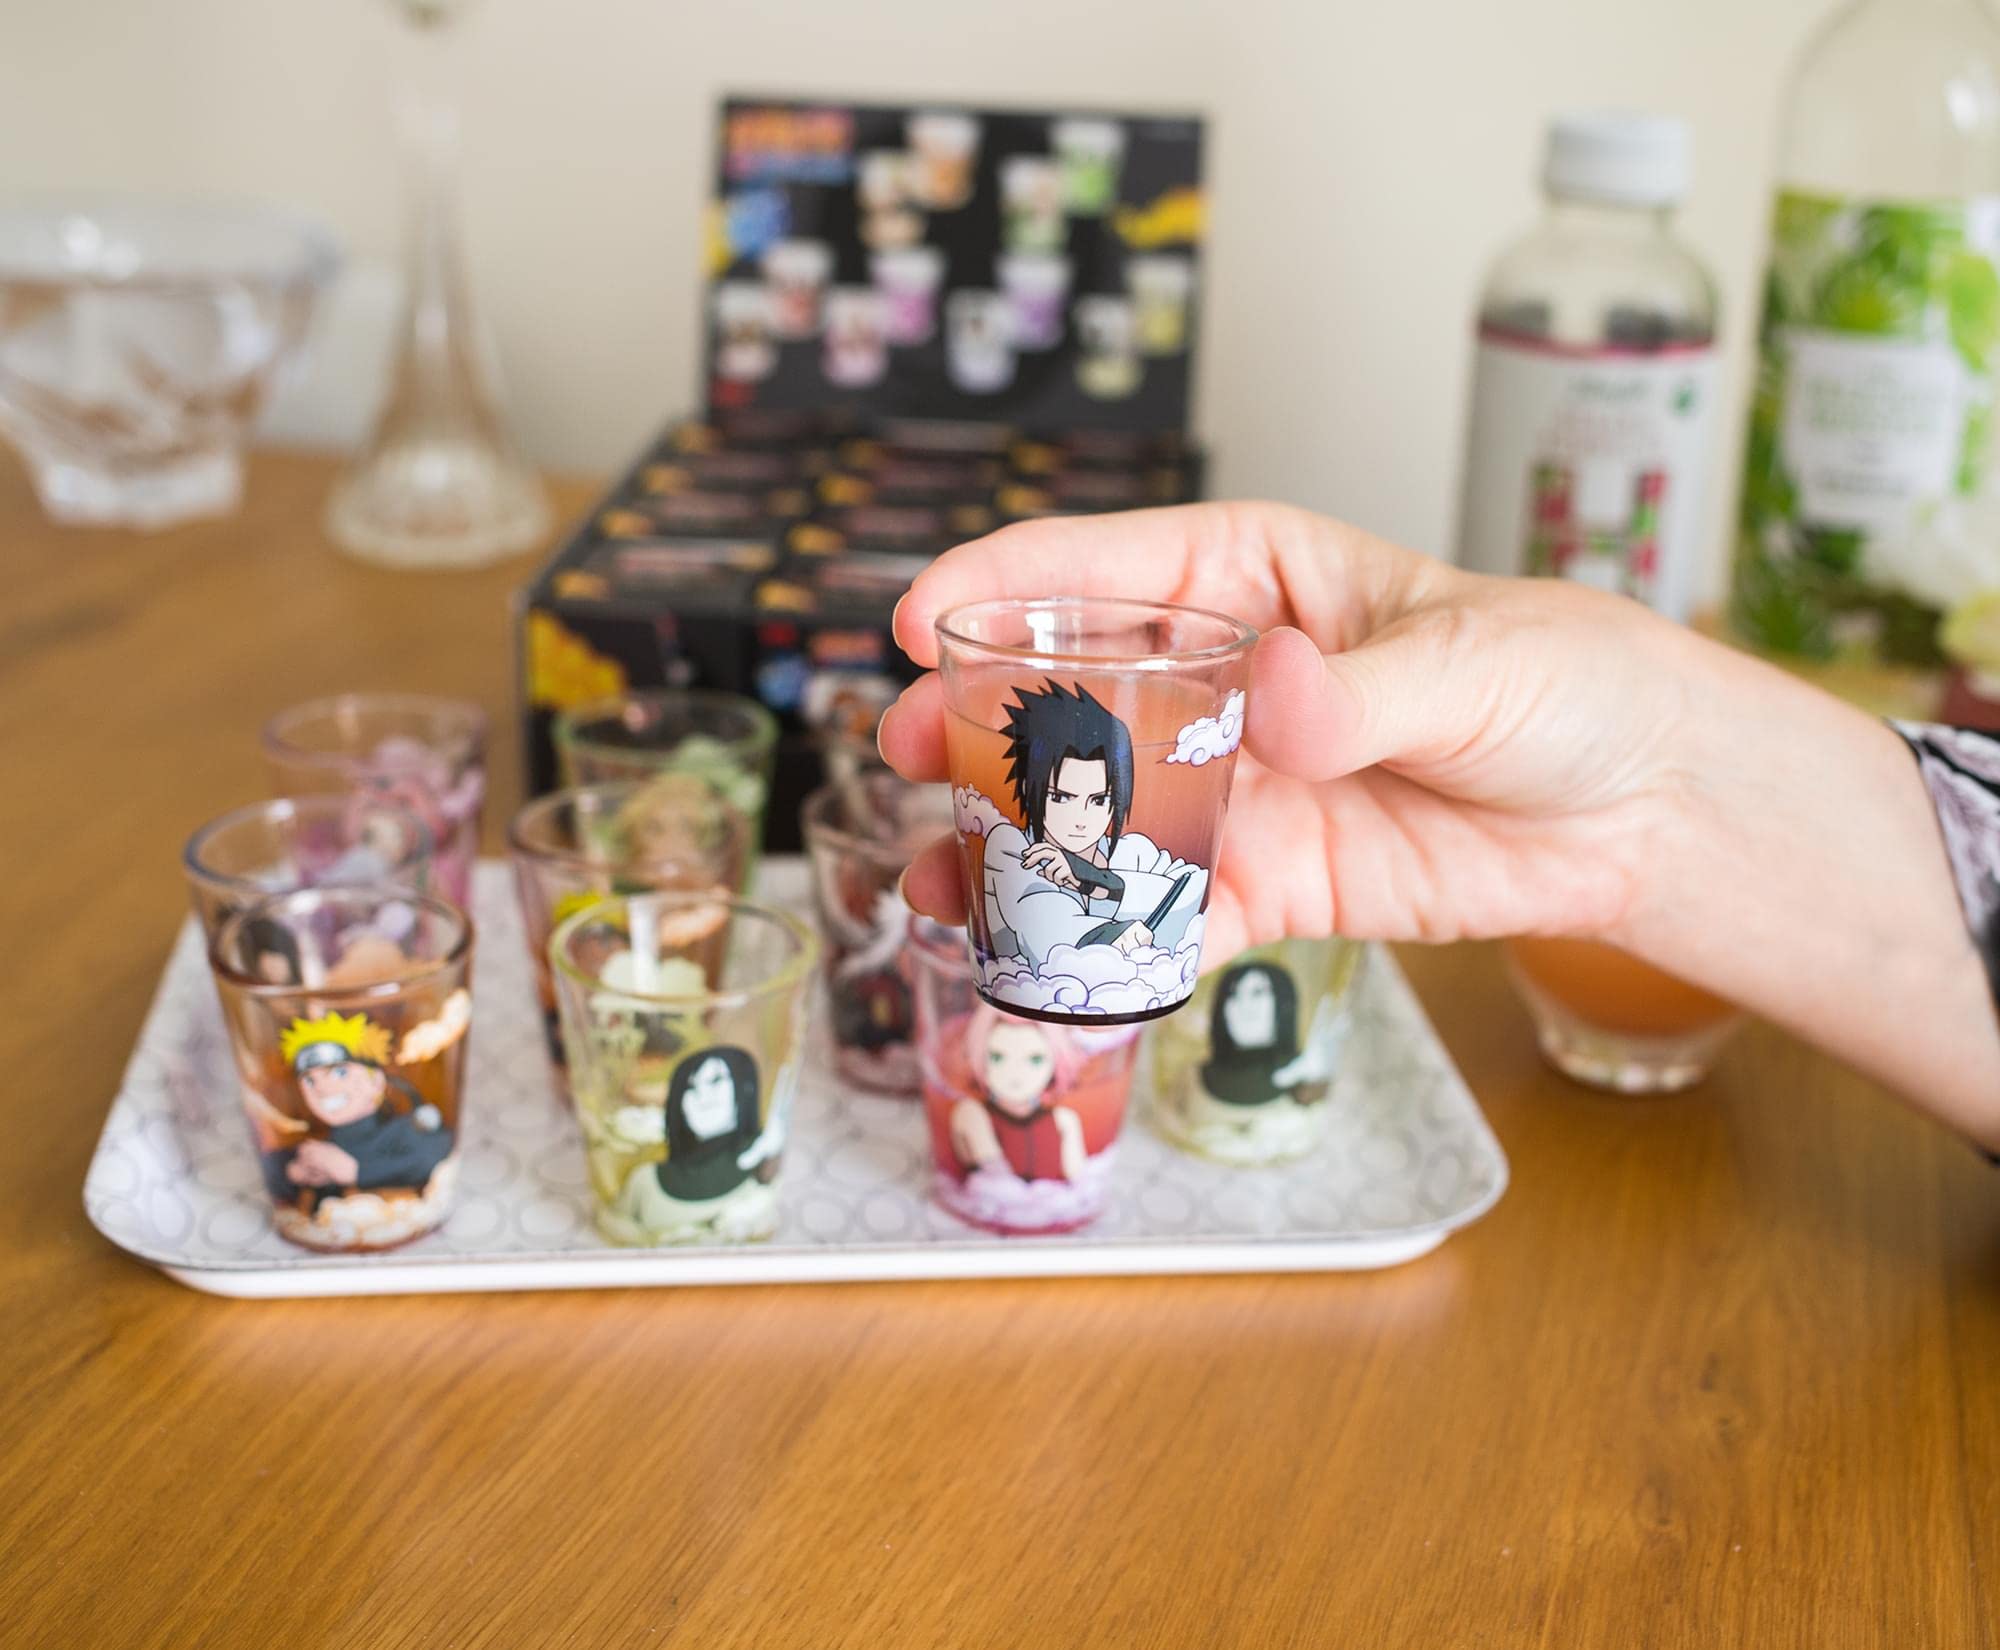 JUST FUNKY Naruto 2-Ounce Round Shot Glass Blind Pack | One Random